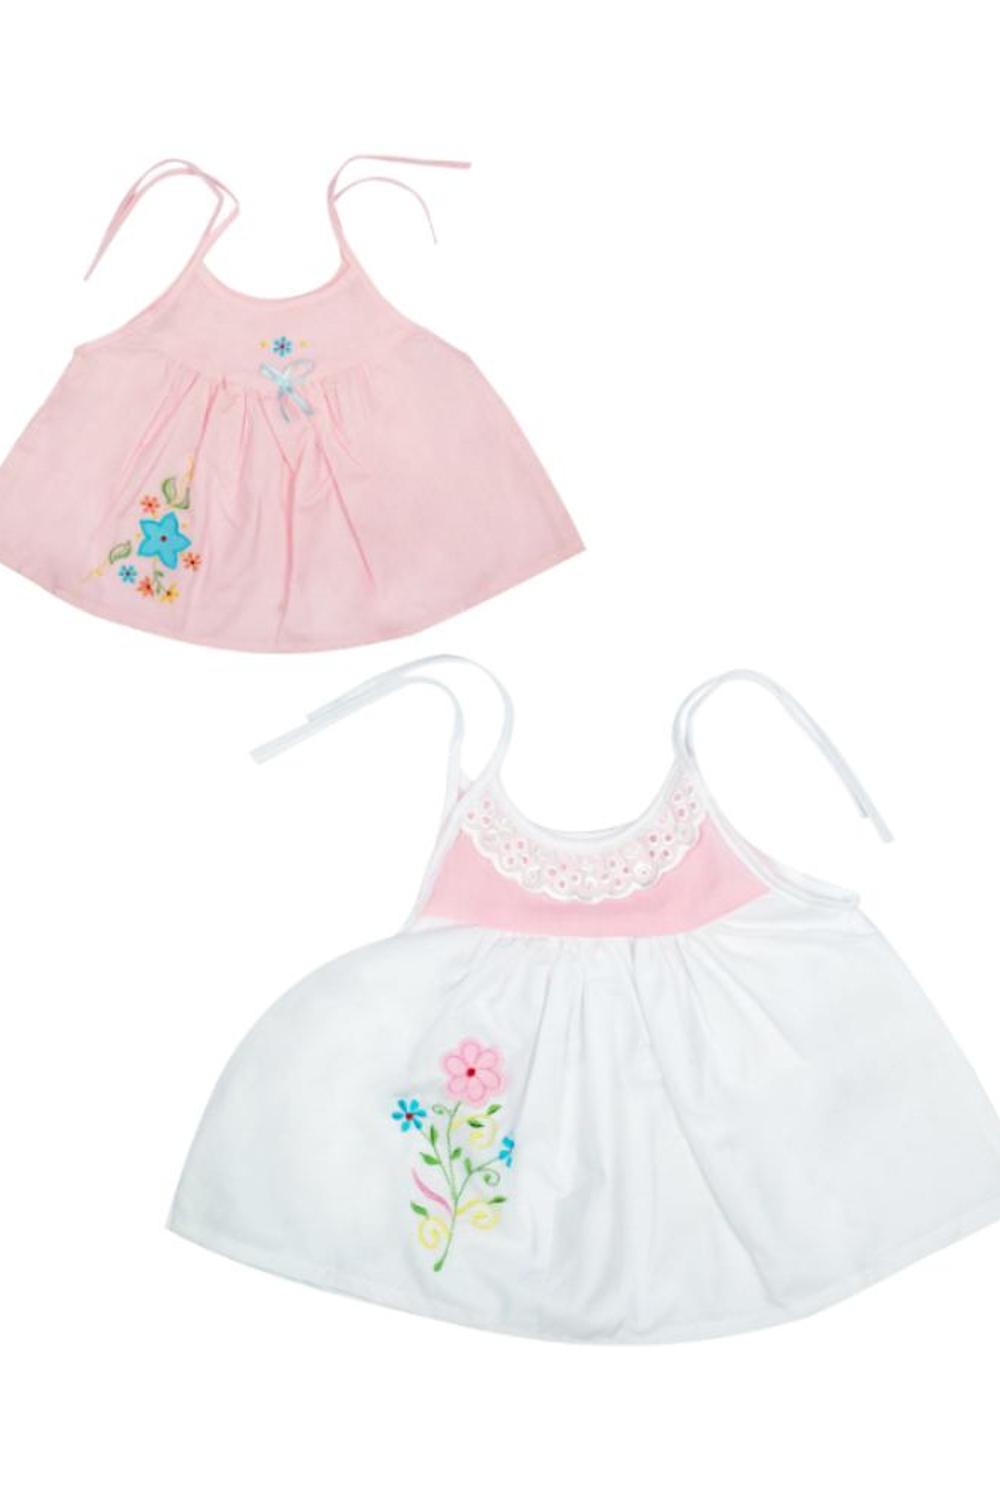 Mee Mee Cotton Sleeveless Jabla Frock Pack Of 3